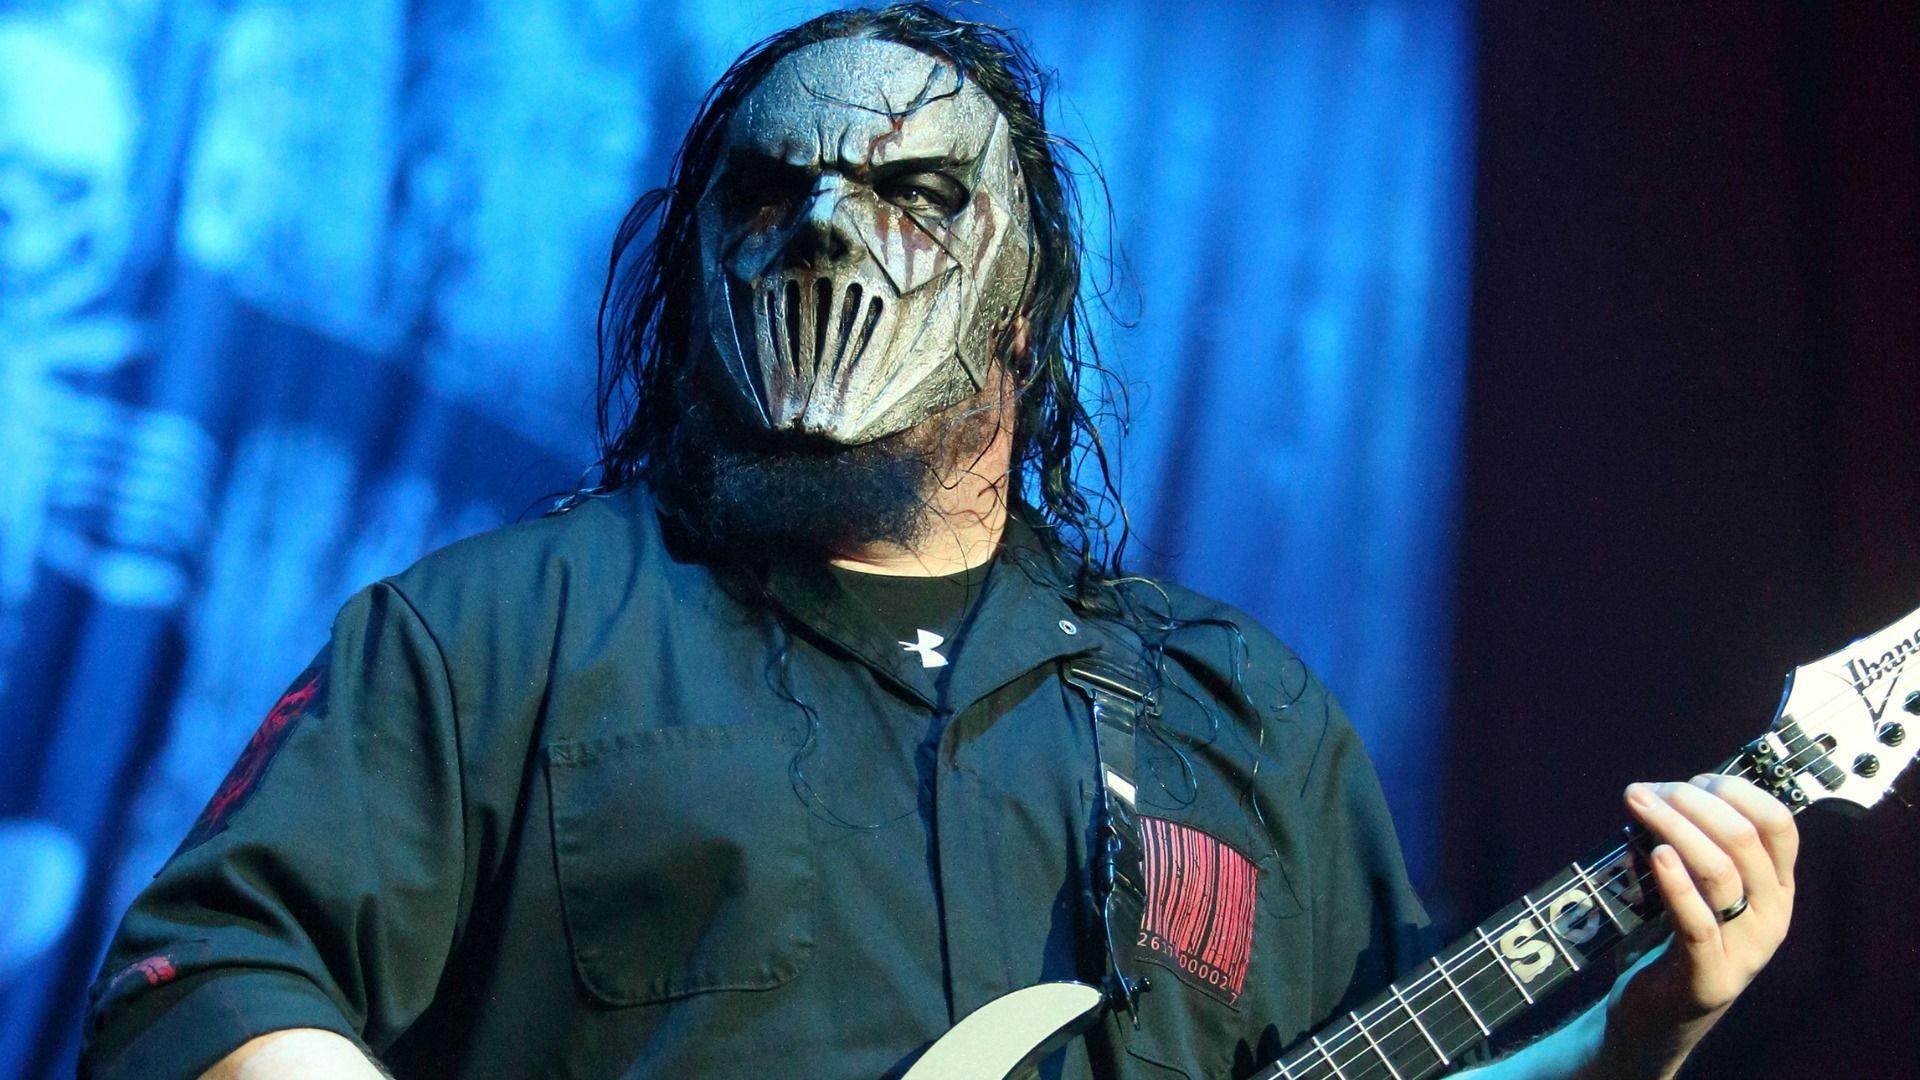 Slipknot Guitarist Mick Thomson Stabbed in the Head.By His